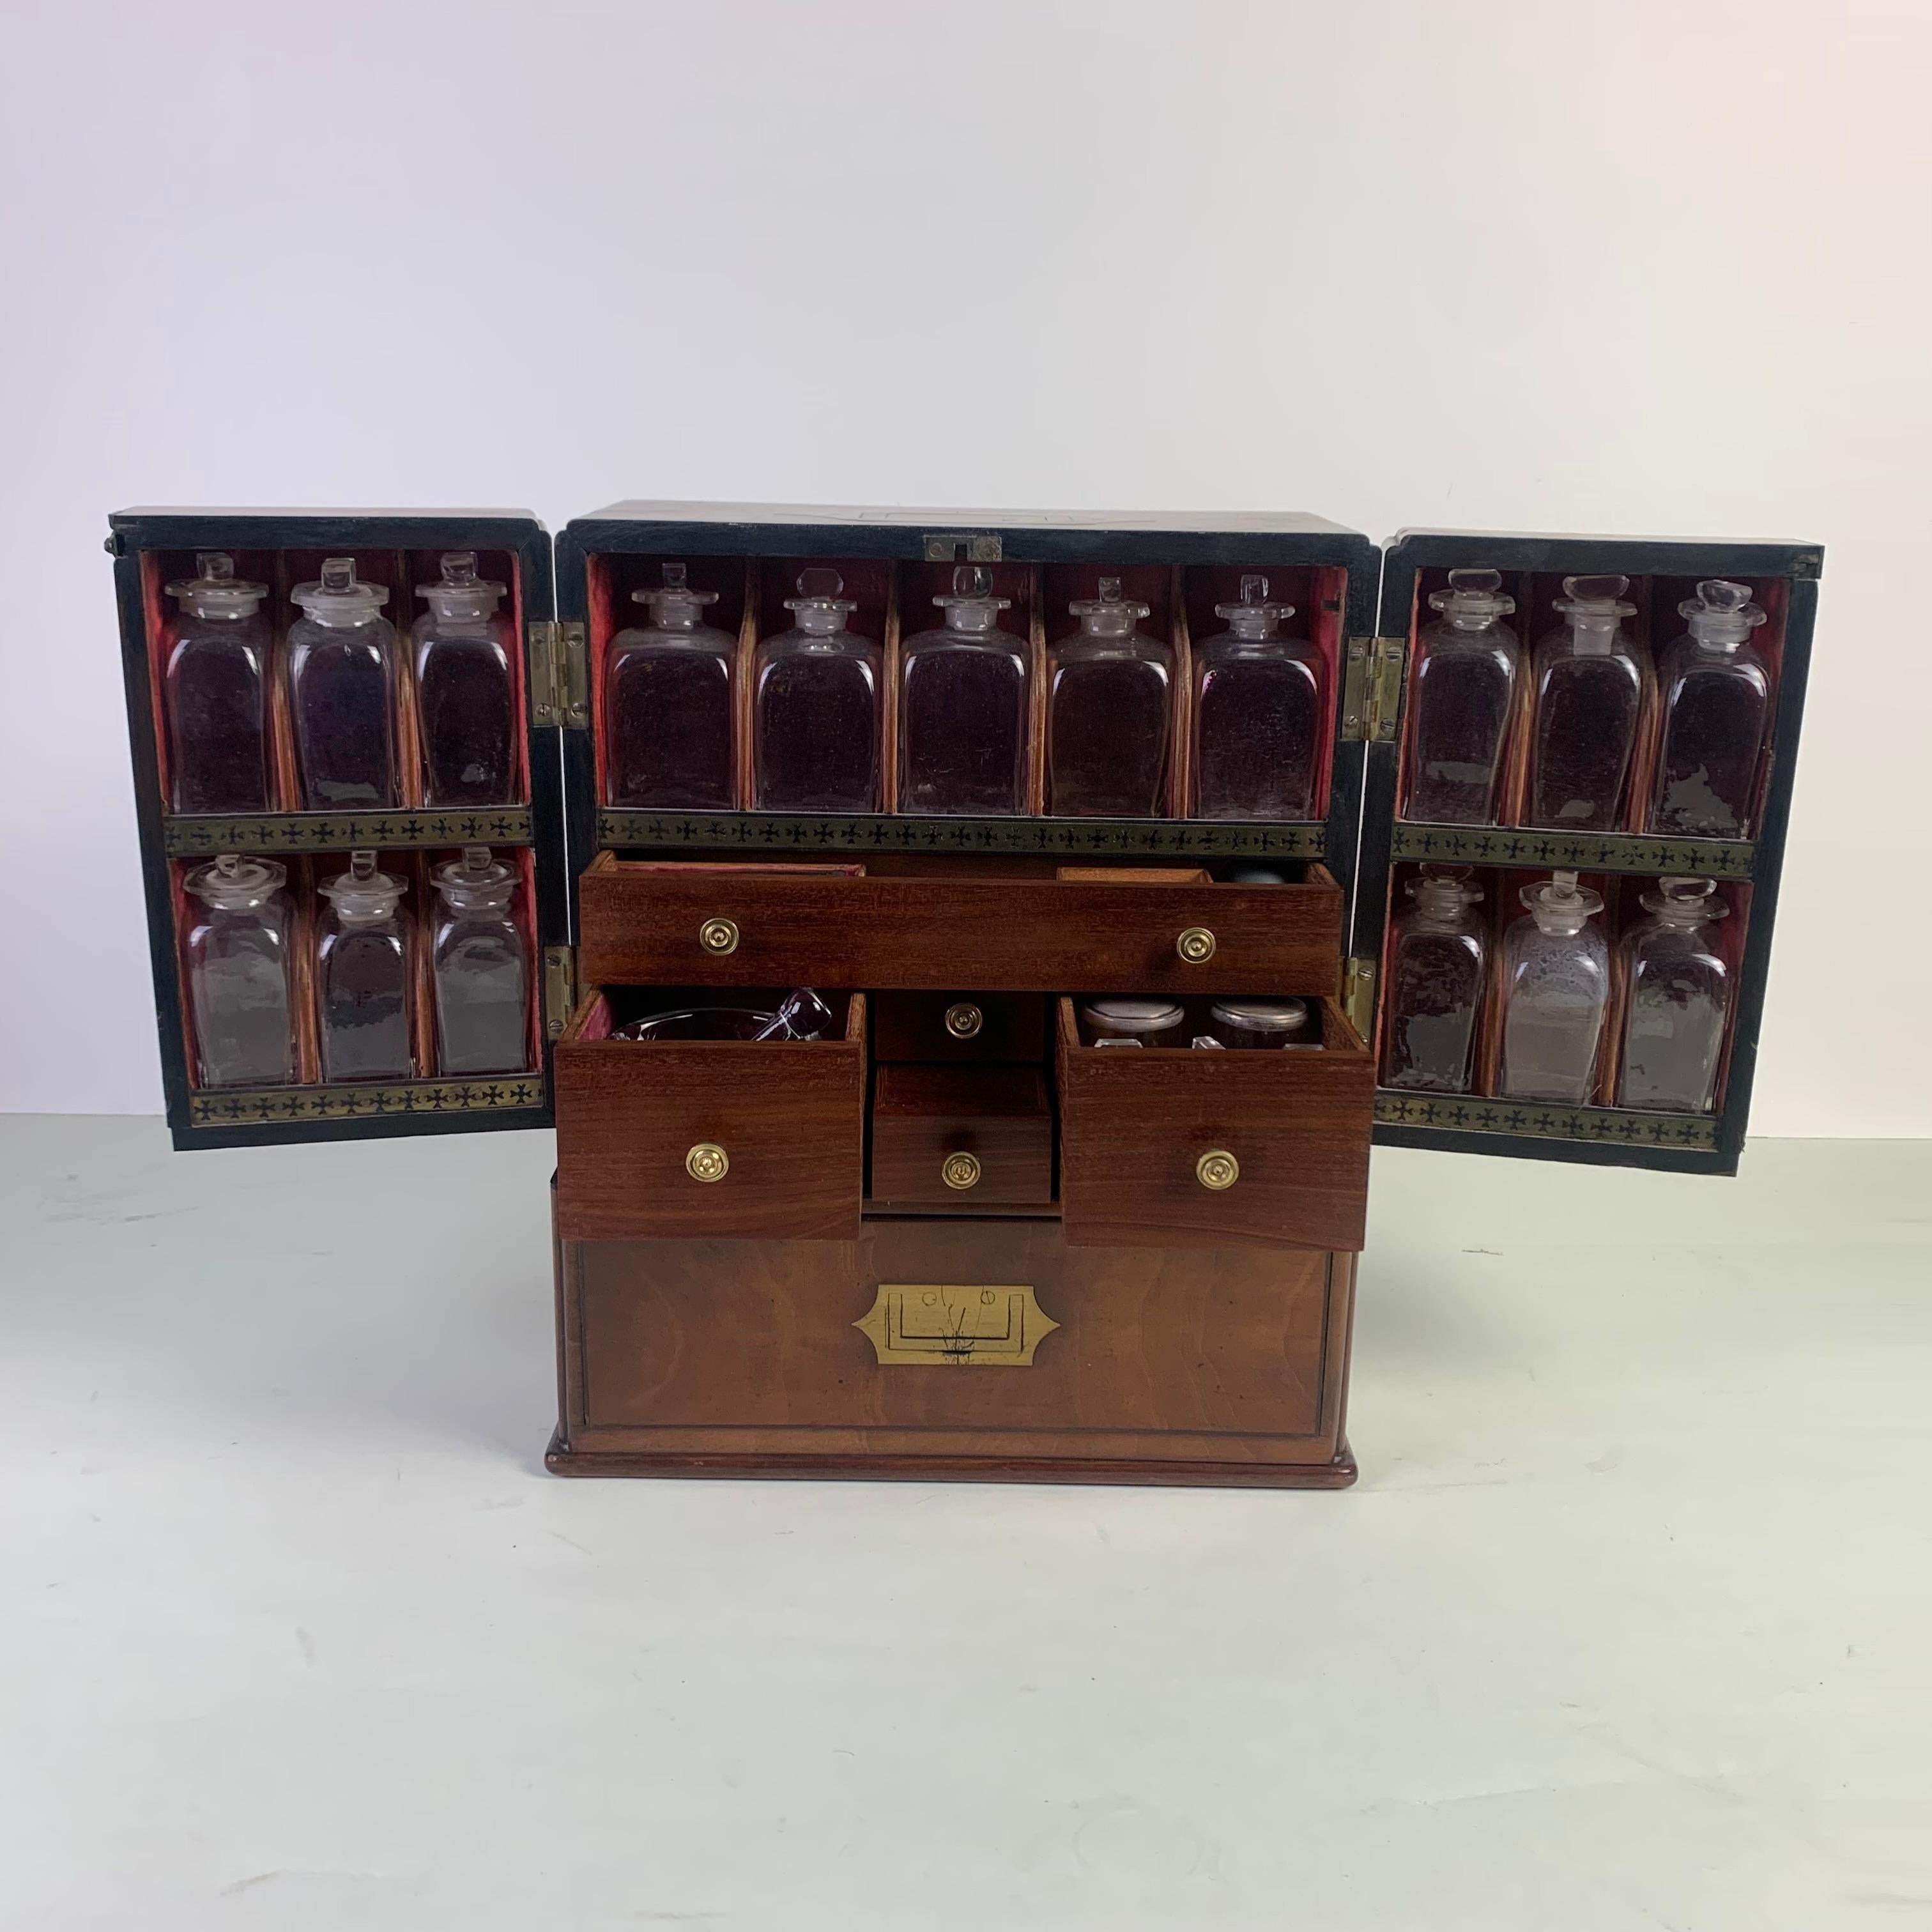 Regency Early 19th Century Physician's Apothecary/Medecine Box